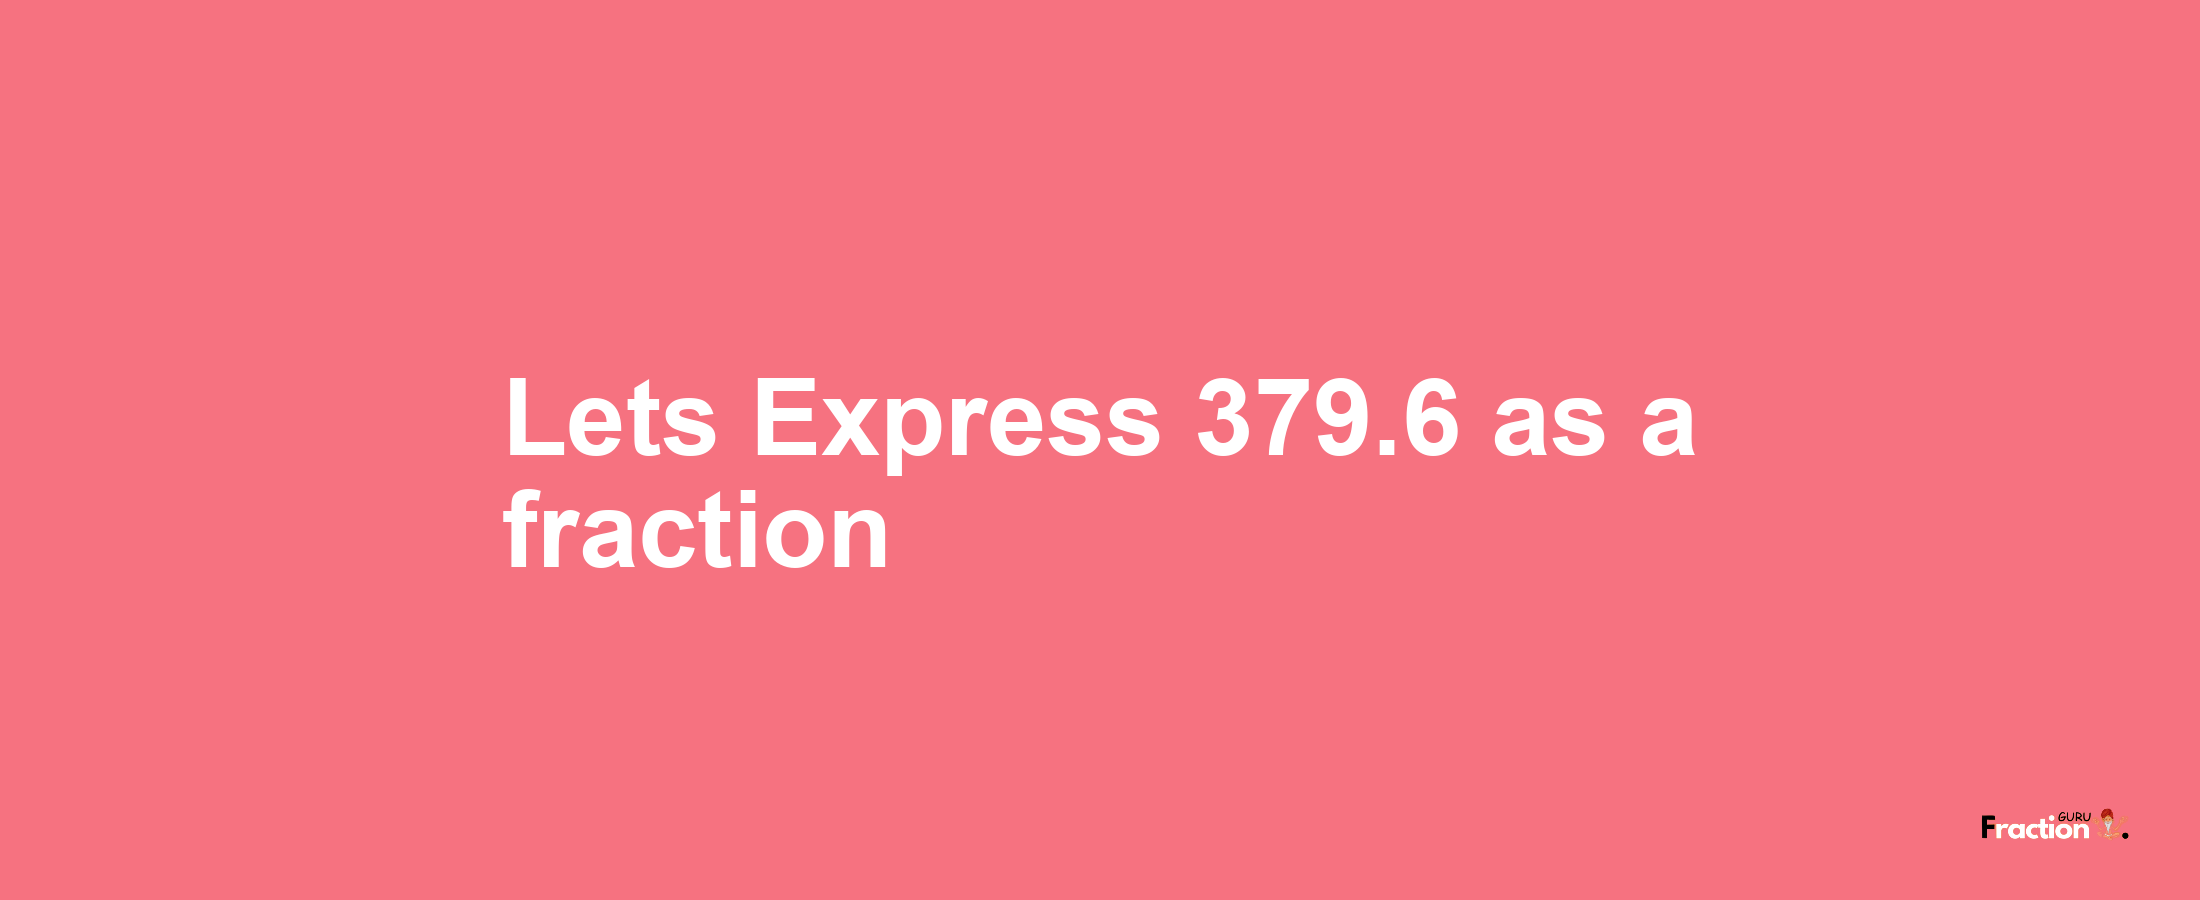 Lets Express 379.6 as afraction